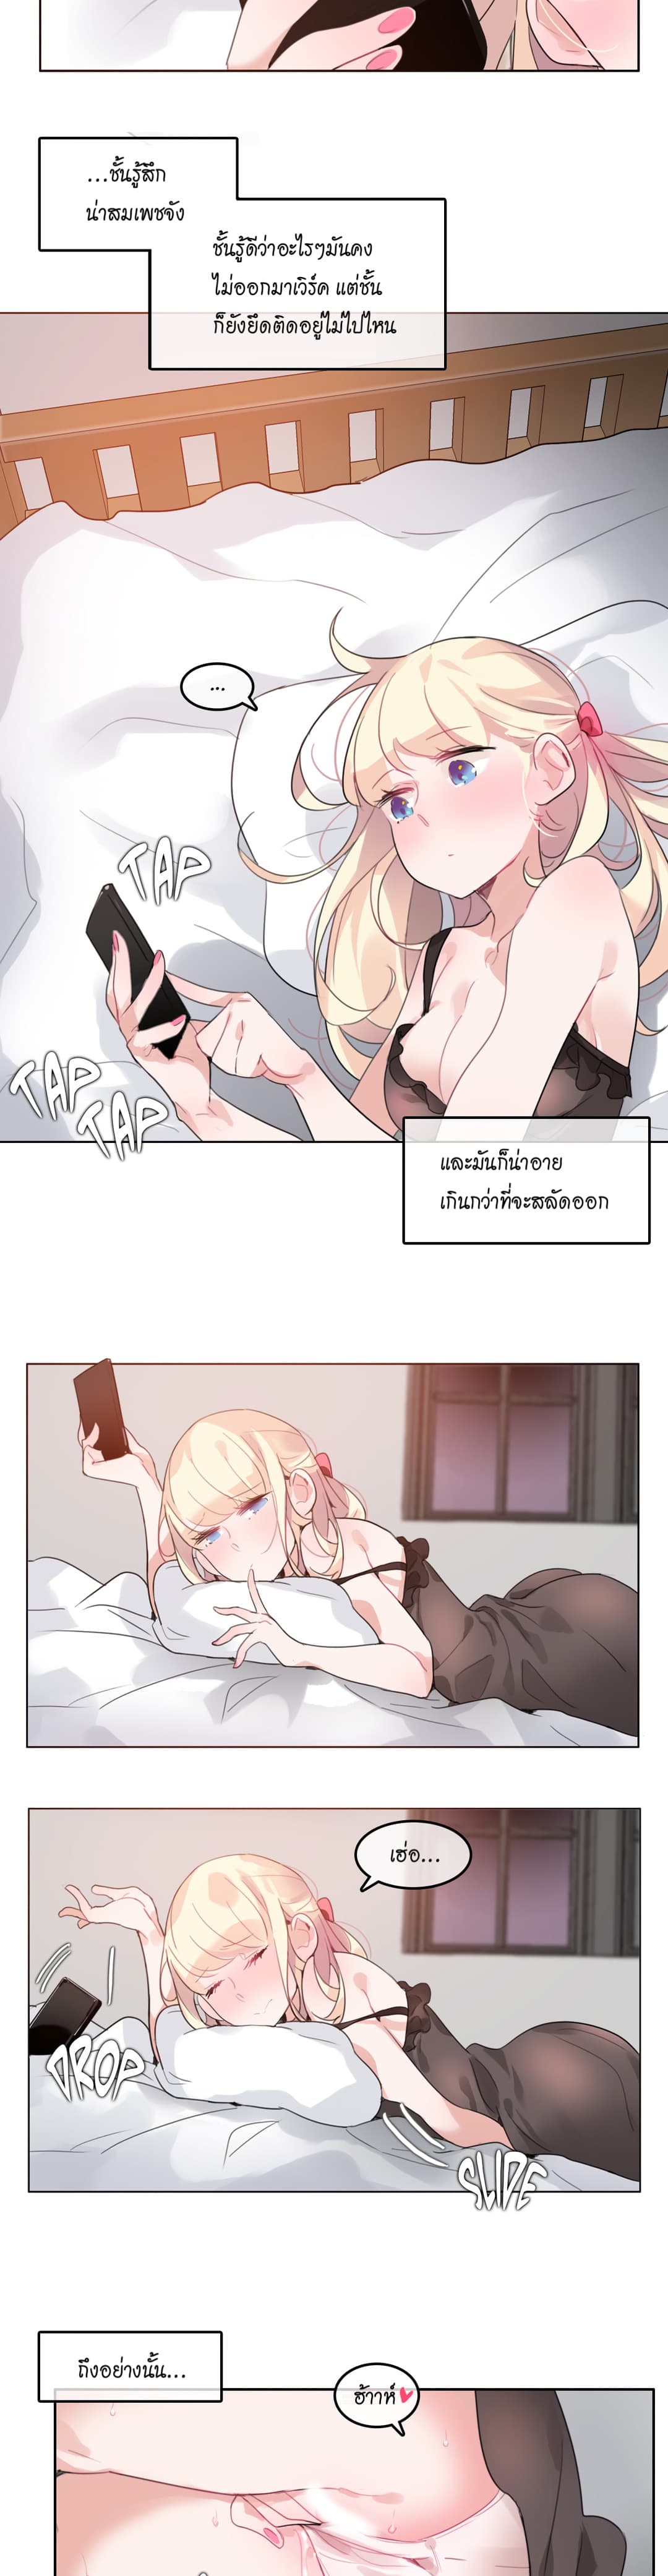 A Pervert’s Daily Life 27 (11)